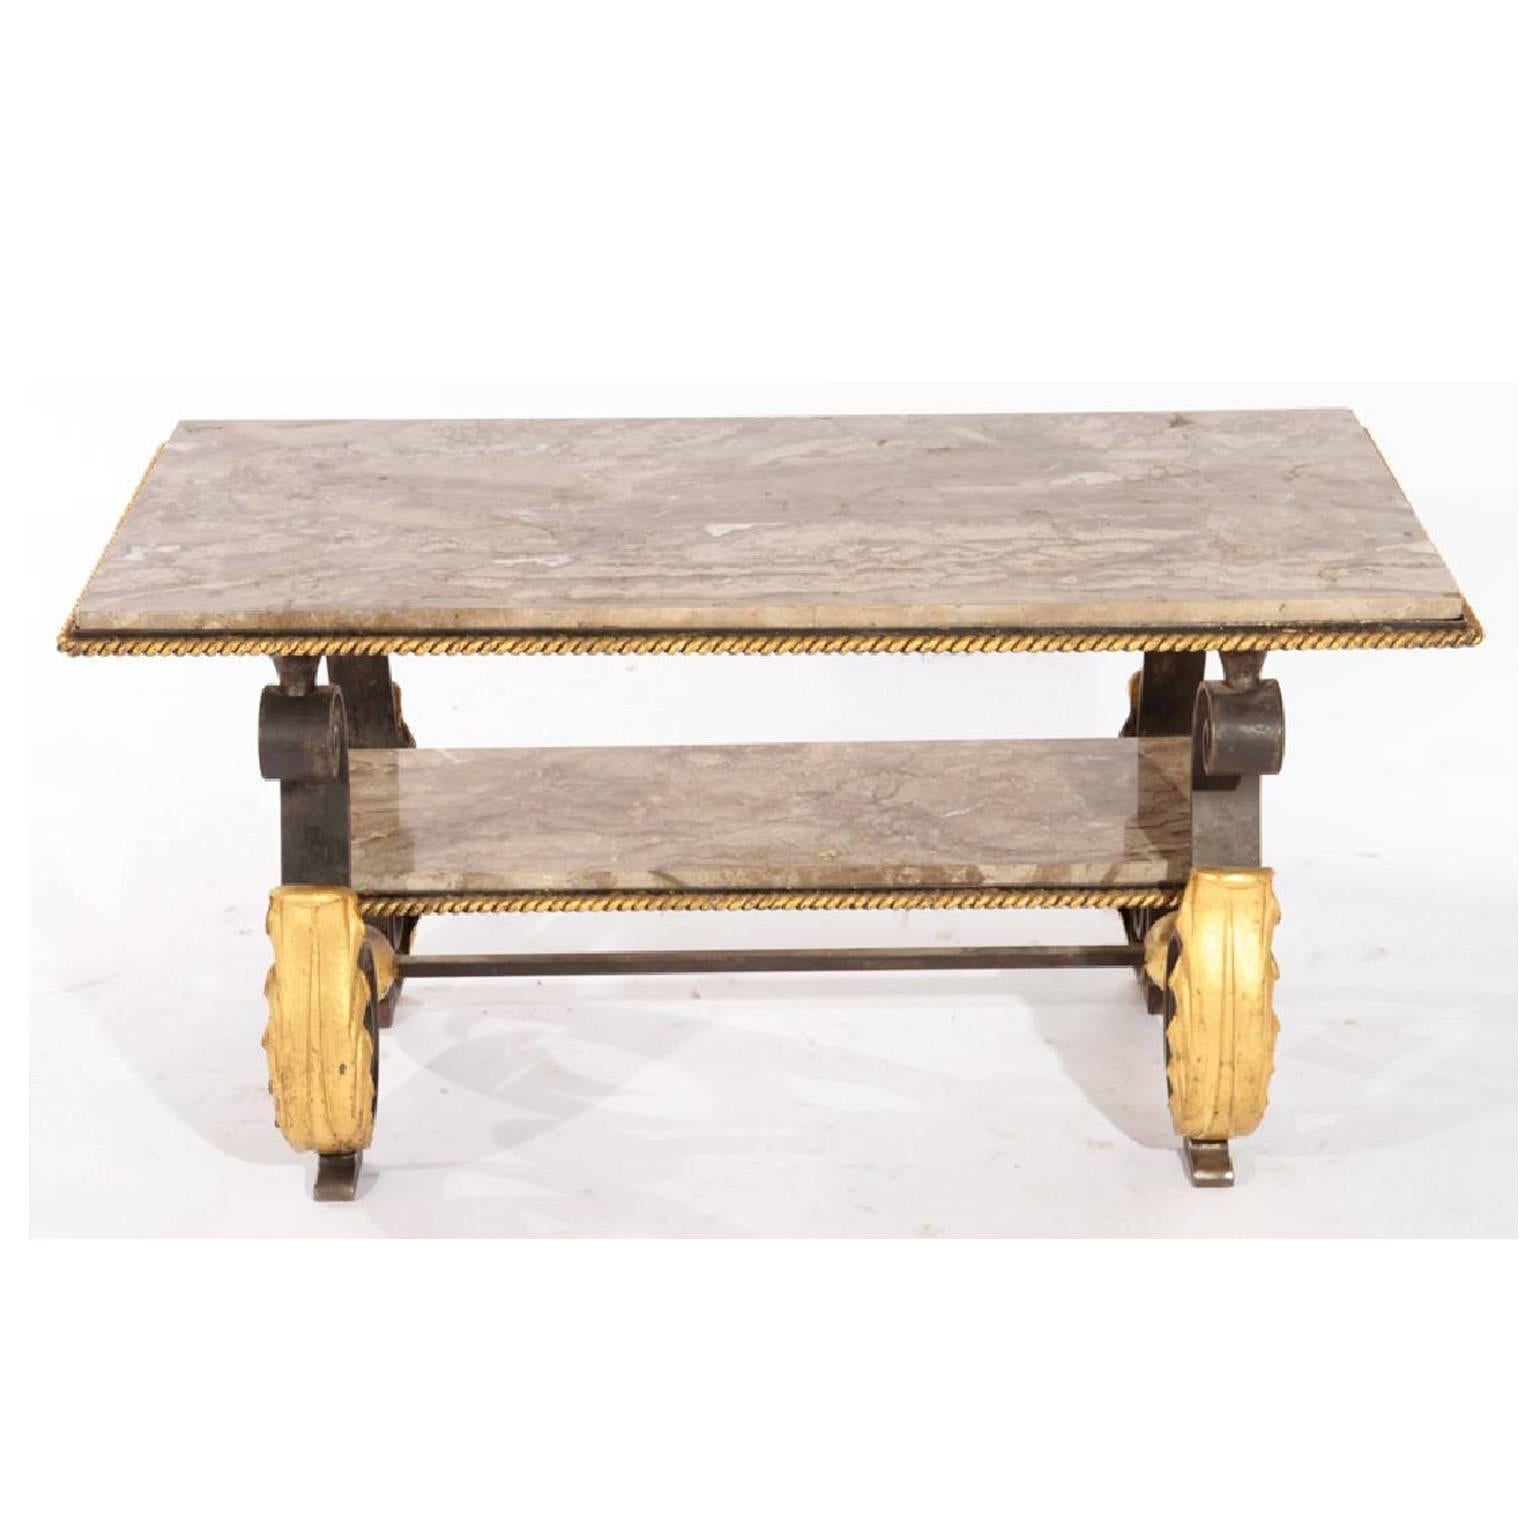 Wrought iron coffee table in the manner of Gilbert Poillerat having inset marble top and lower platform with gilt twist frame, France

Architect, Sandy Littman of Duesenberg LTD.  and The American Glass Light Company have been making beautiful